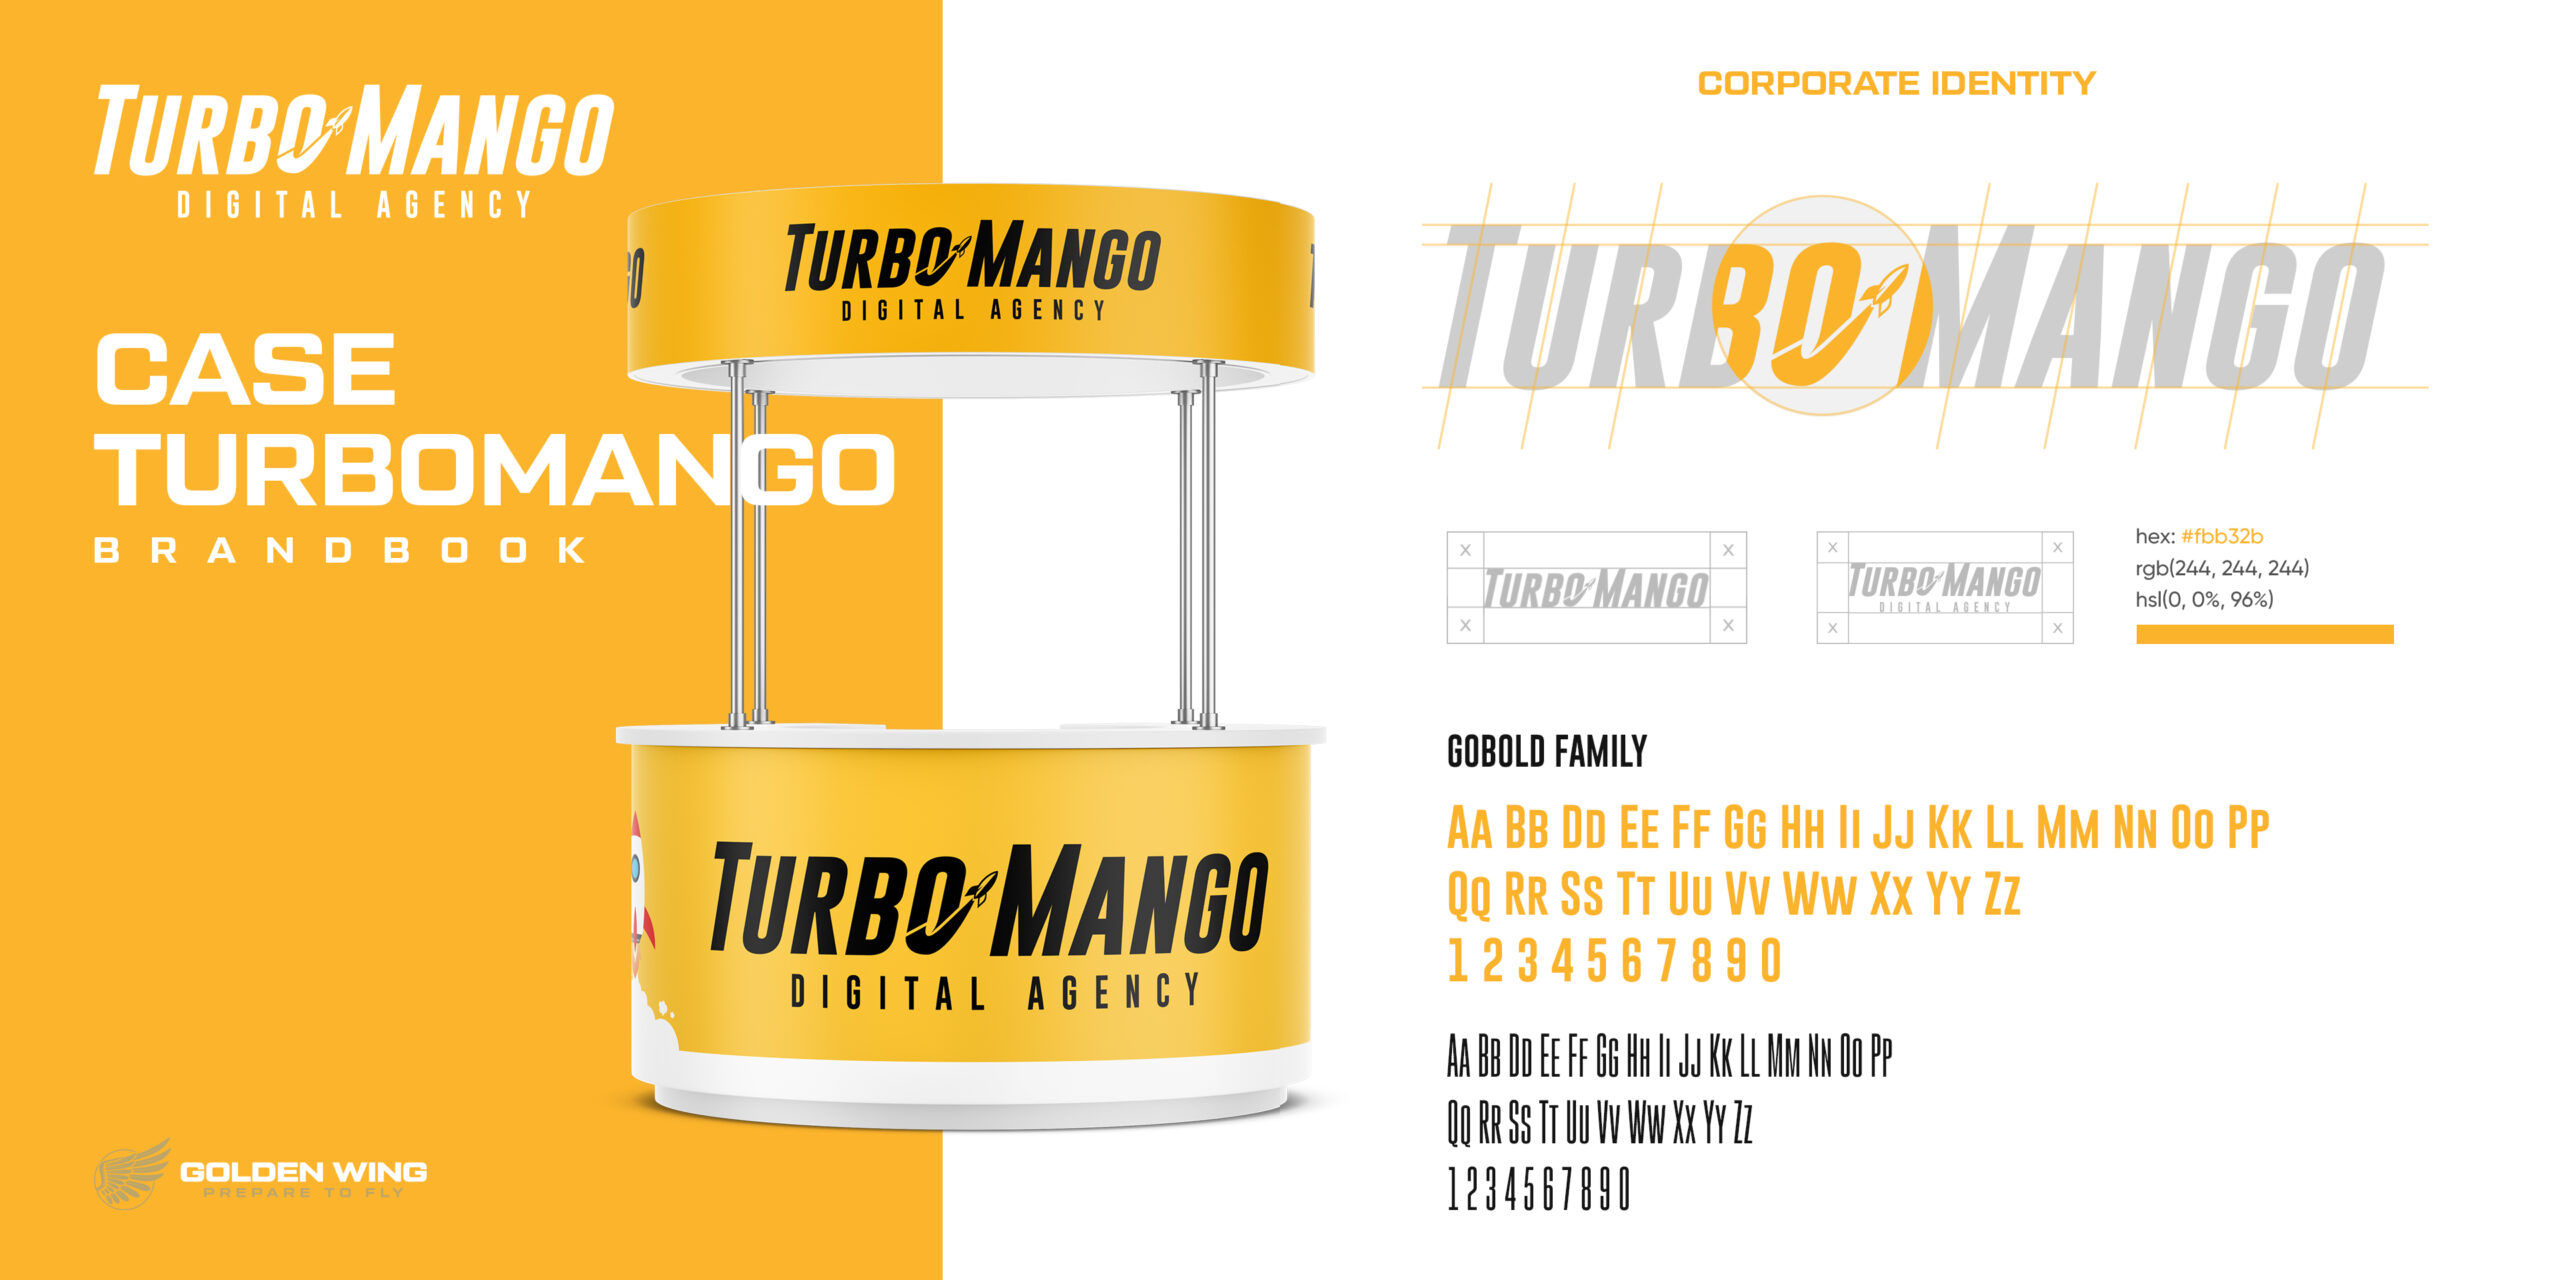 TurboMango Digital Agency corporate identity including logo design, font family specifications, and trade fair exhibition booth showcasing cohesive branding elements.